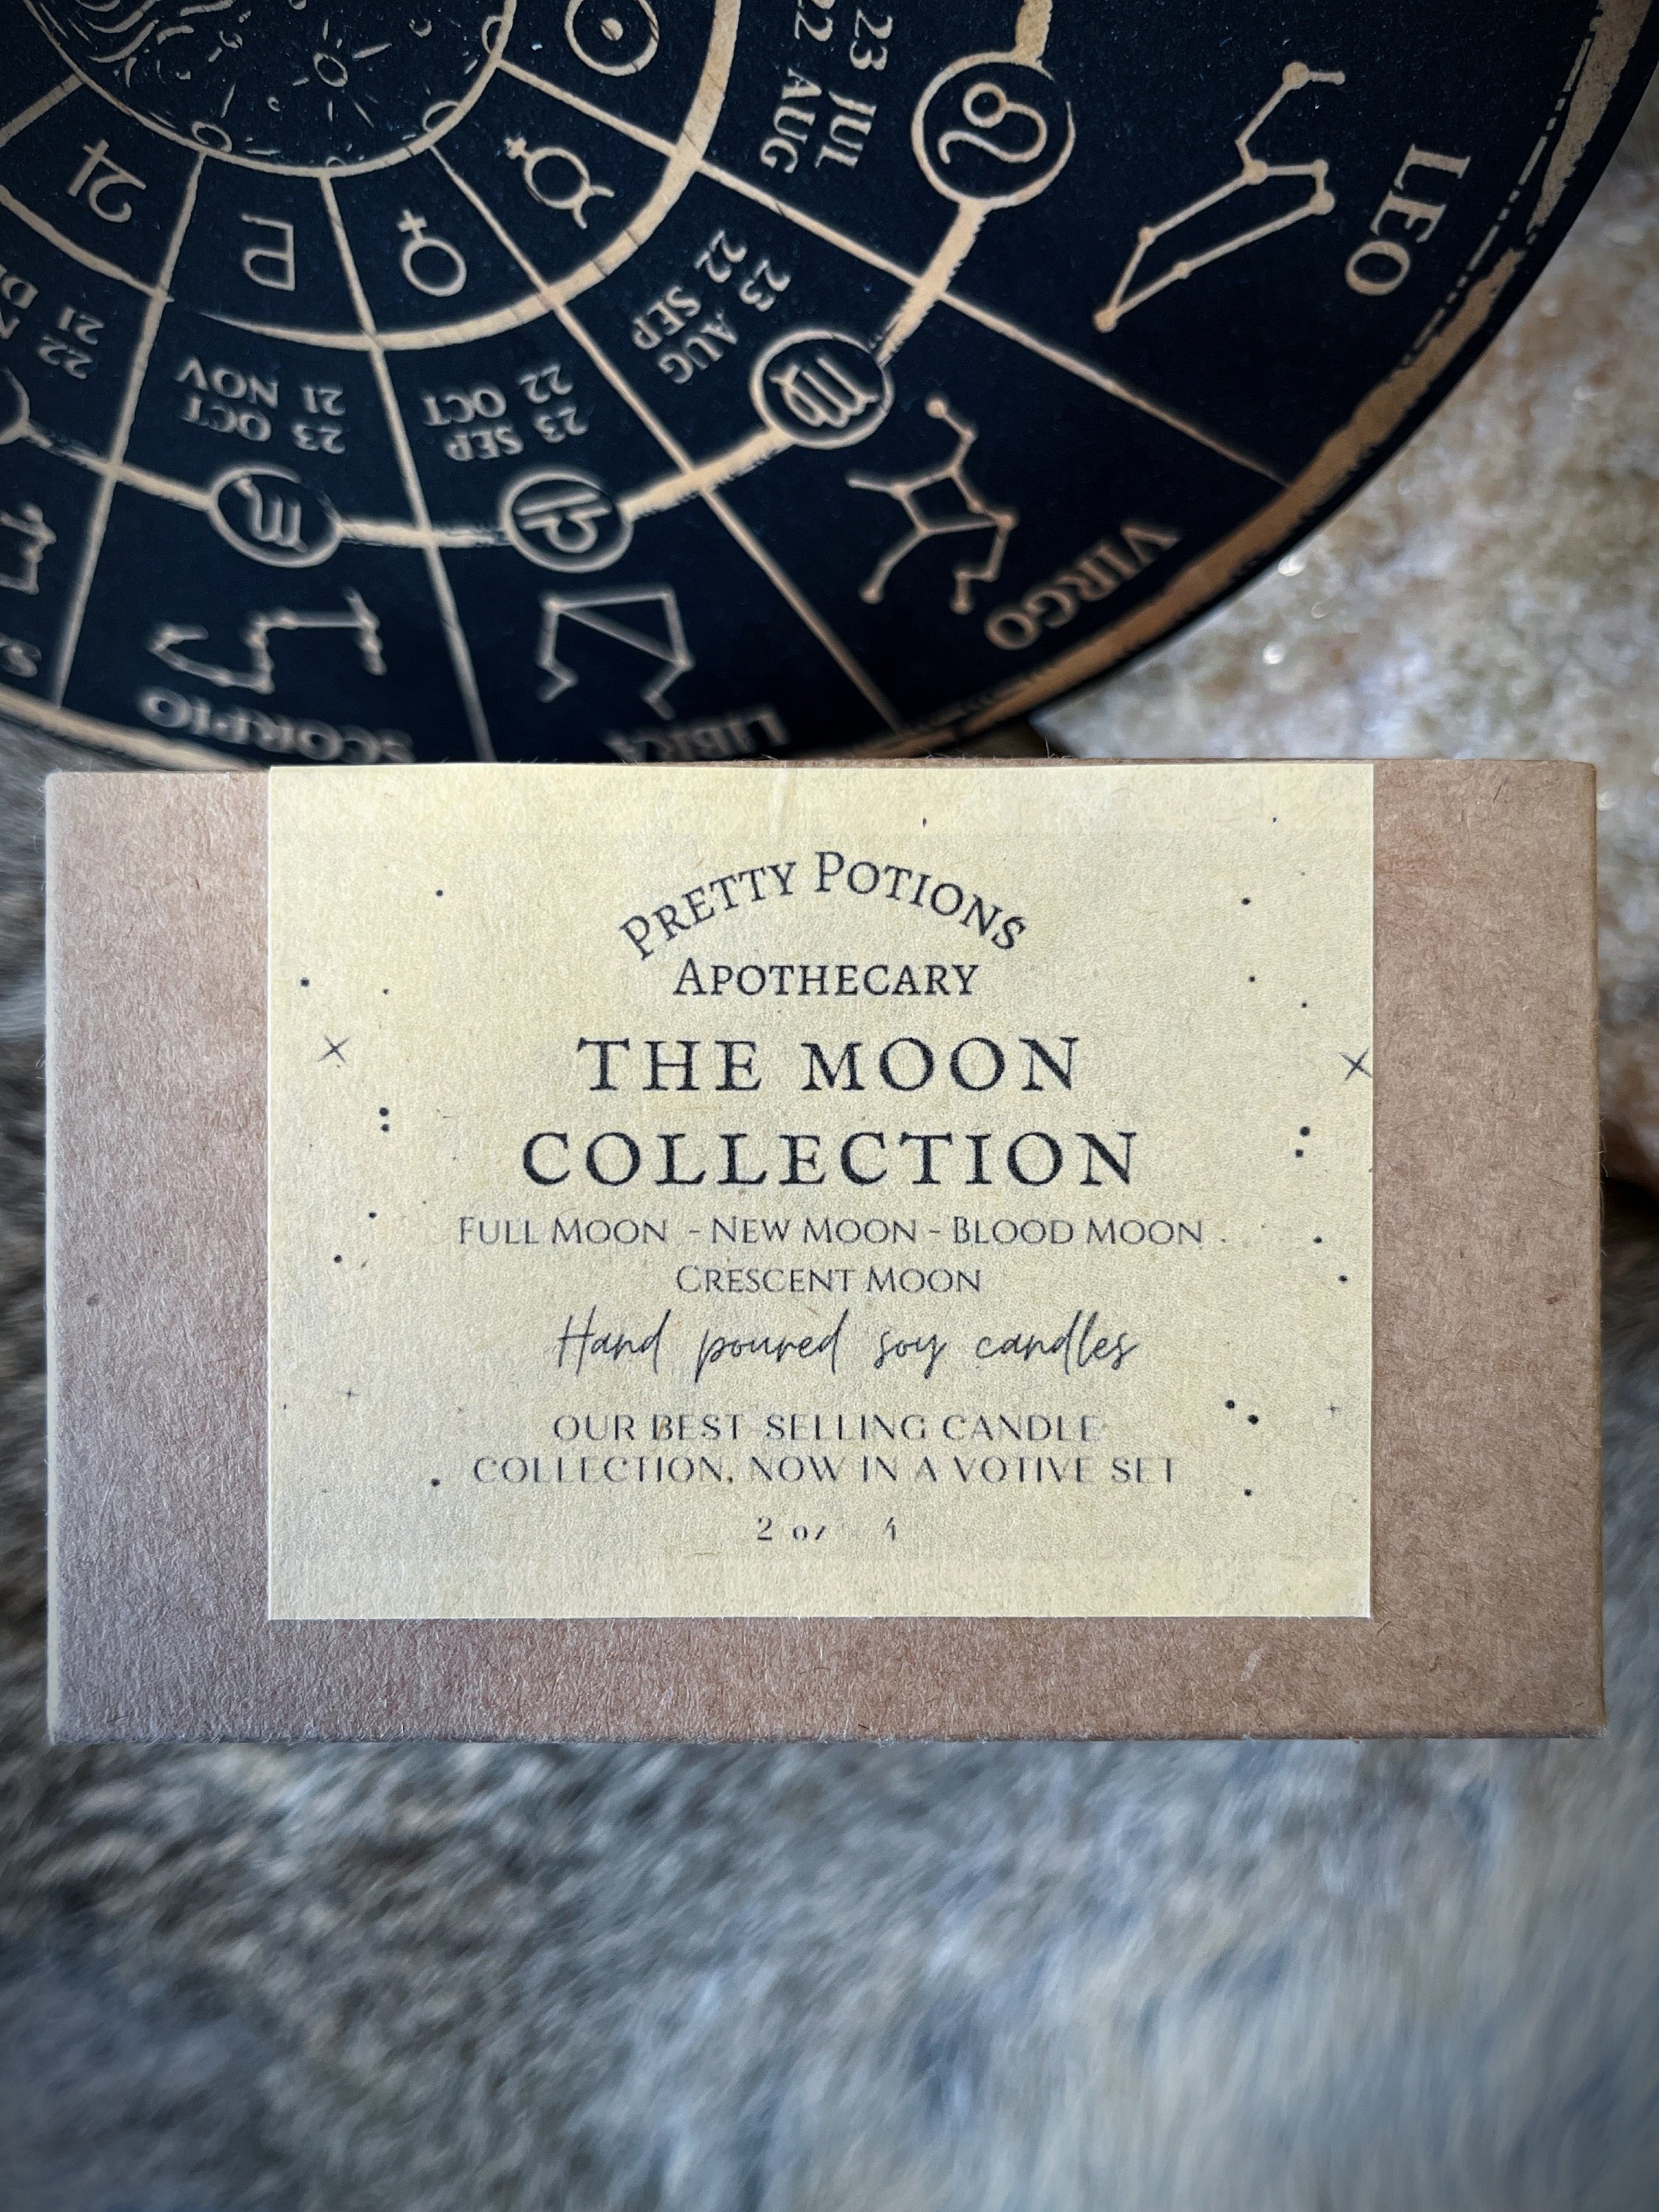 The Moon Votive Collection